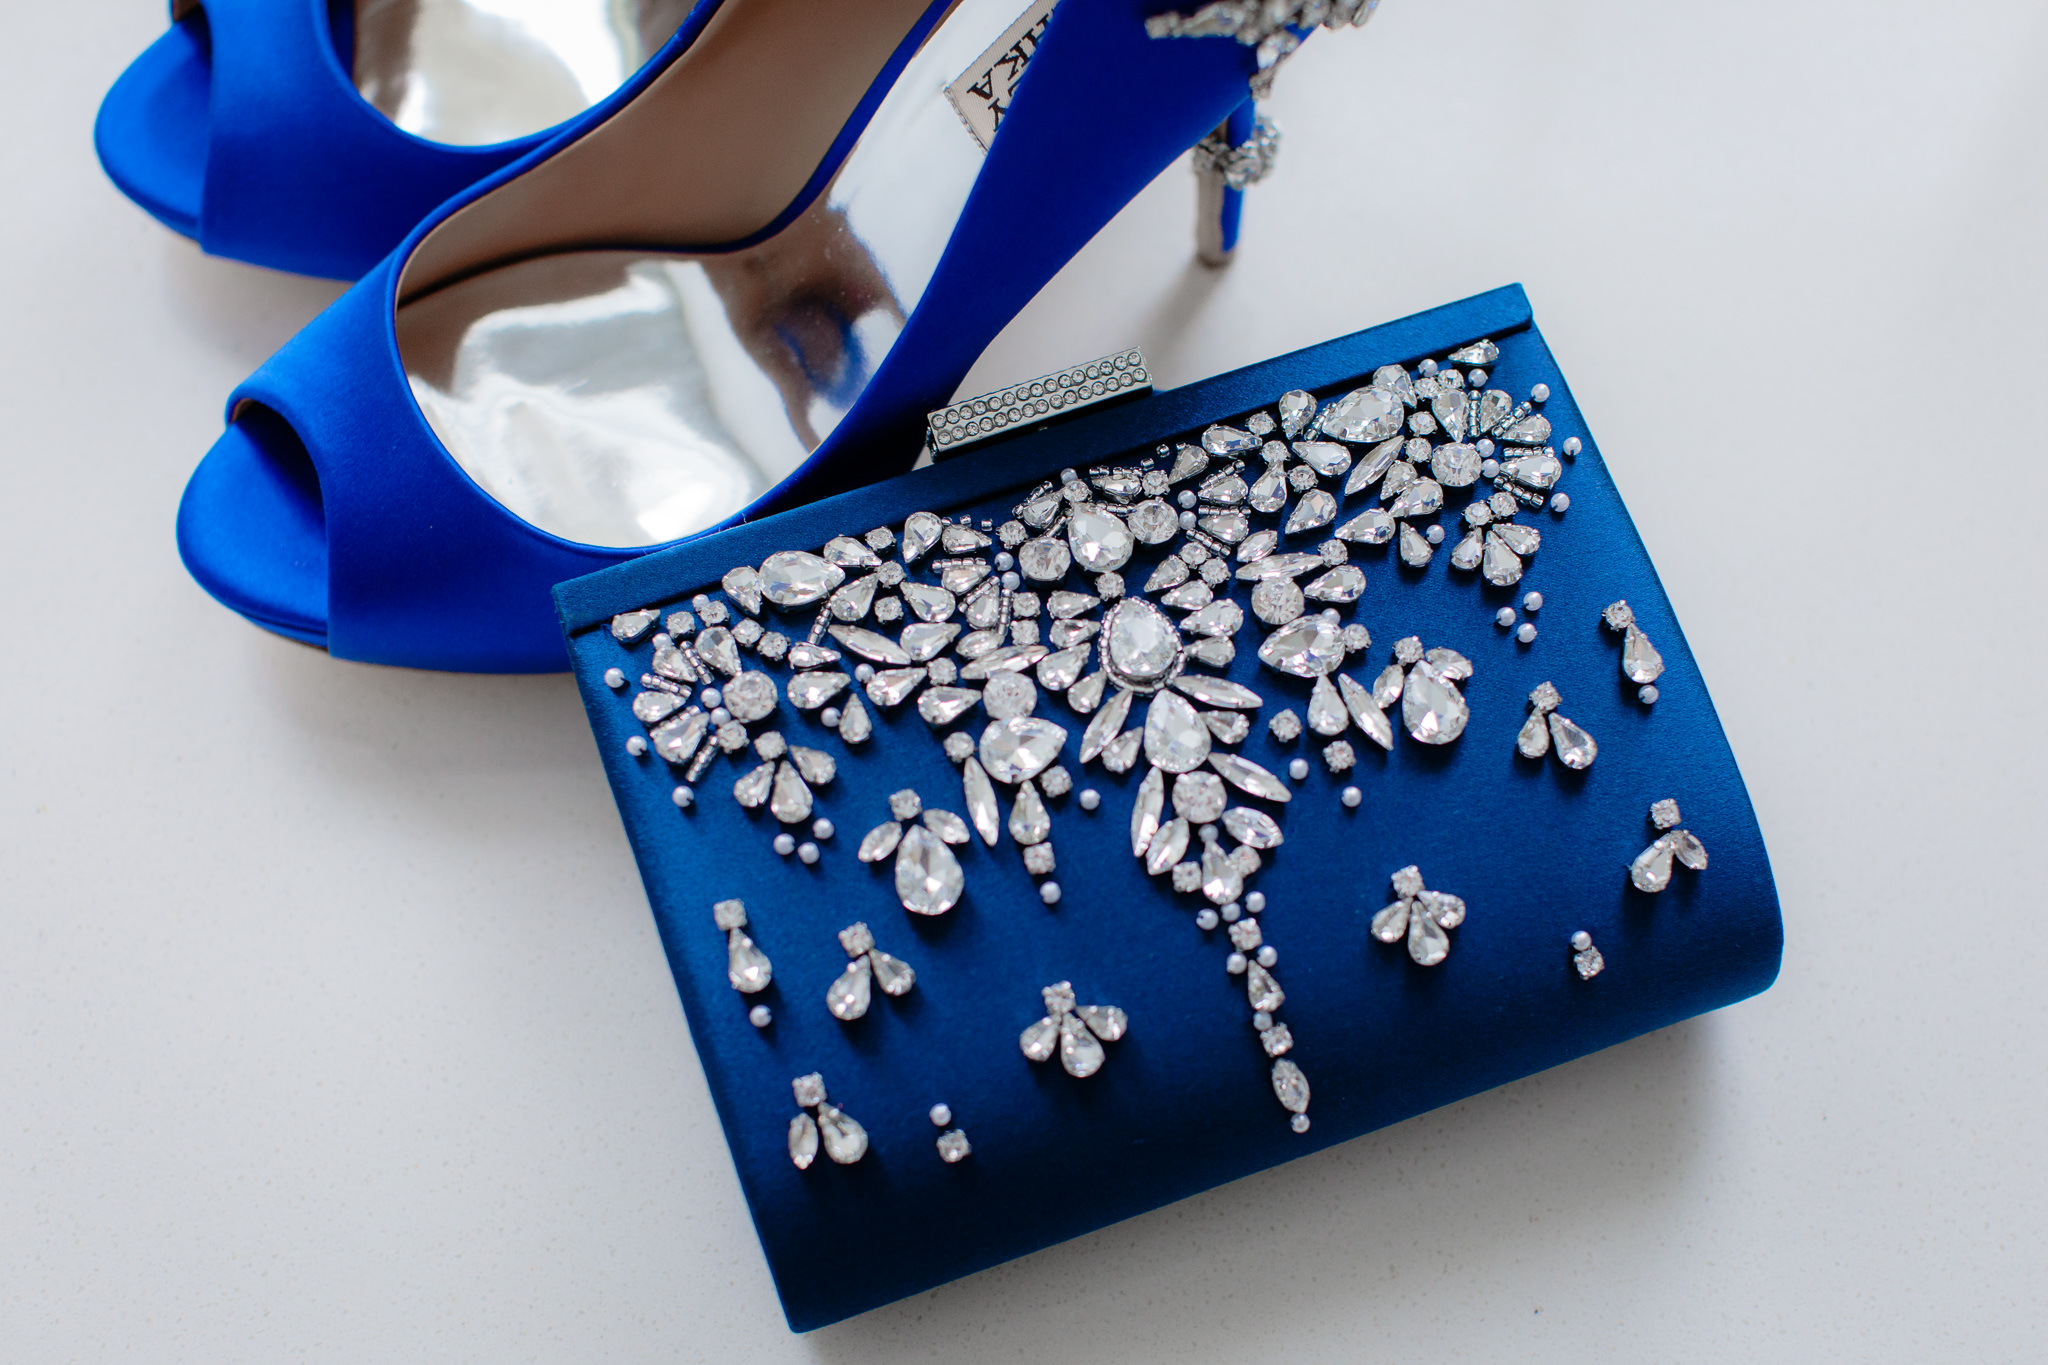 Bride's navy blue clutch purse adorned with rhinestone accents